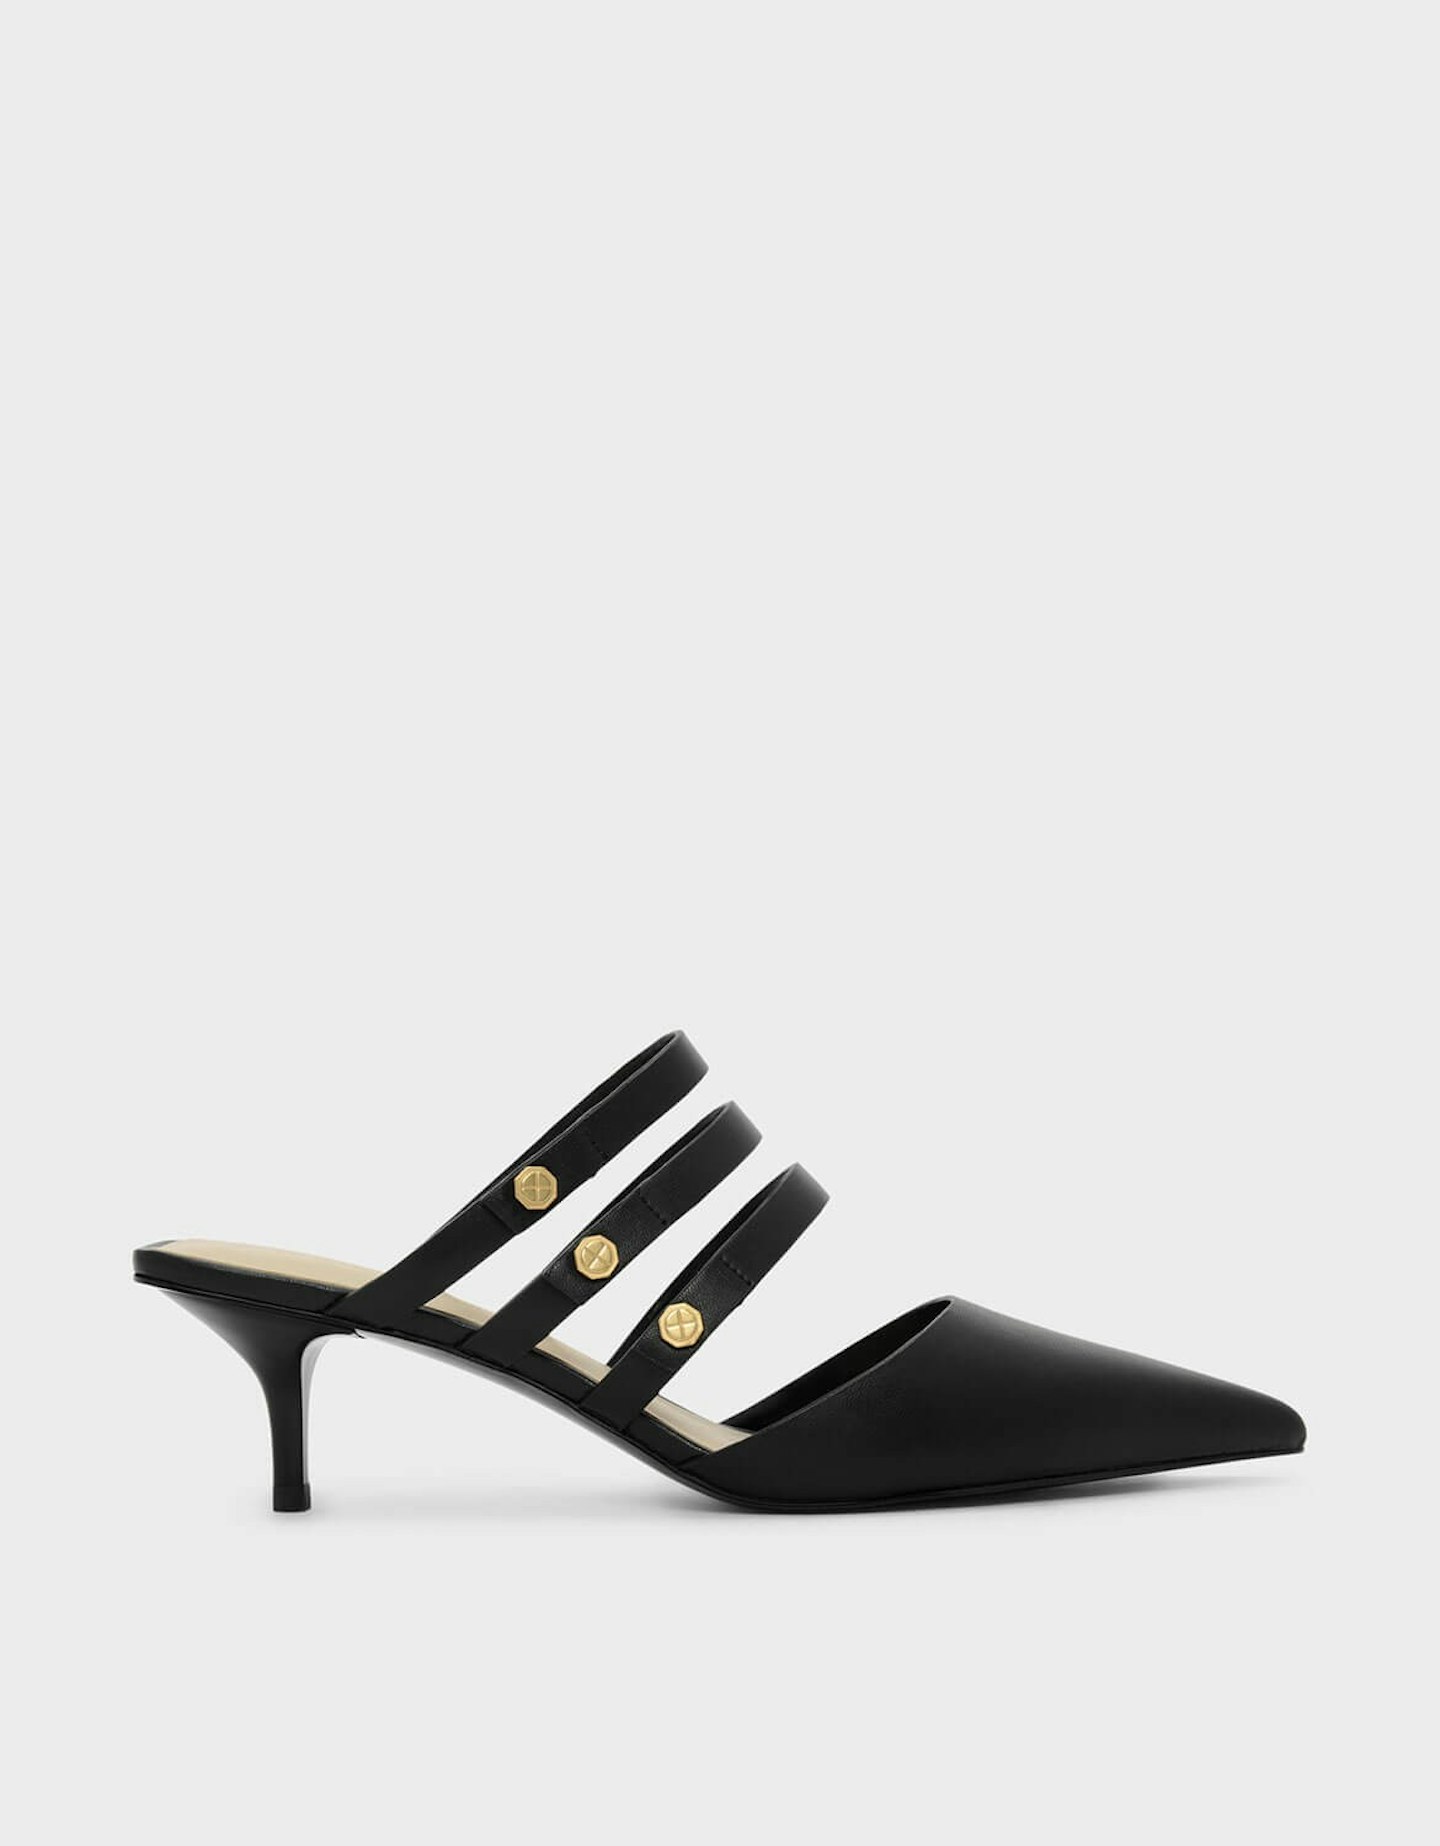 Charles & Keith, Strappy Square Black Mules, £45